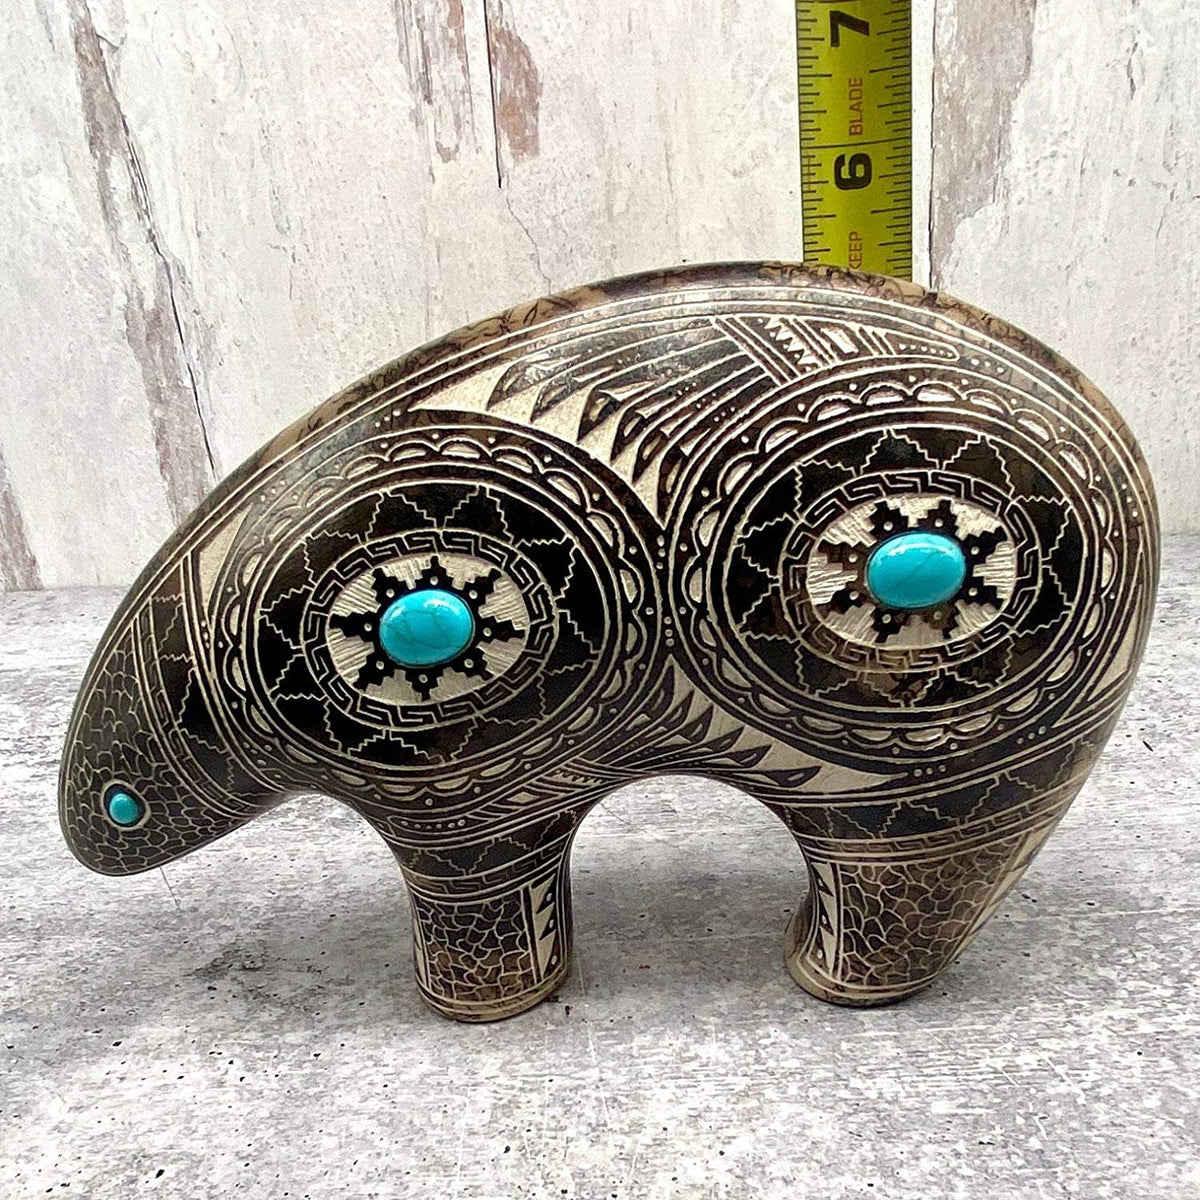 Authentic Native American Spirit Bear Figurine, Sleeping Beauty Turquoise, Genuine Navajo Tribe USA Handpainted and Etched, Artist Signed, Southwestern Home Decor Pottery, Horse Hair Style